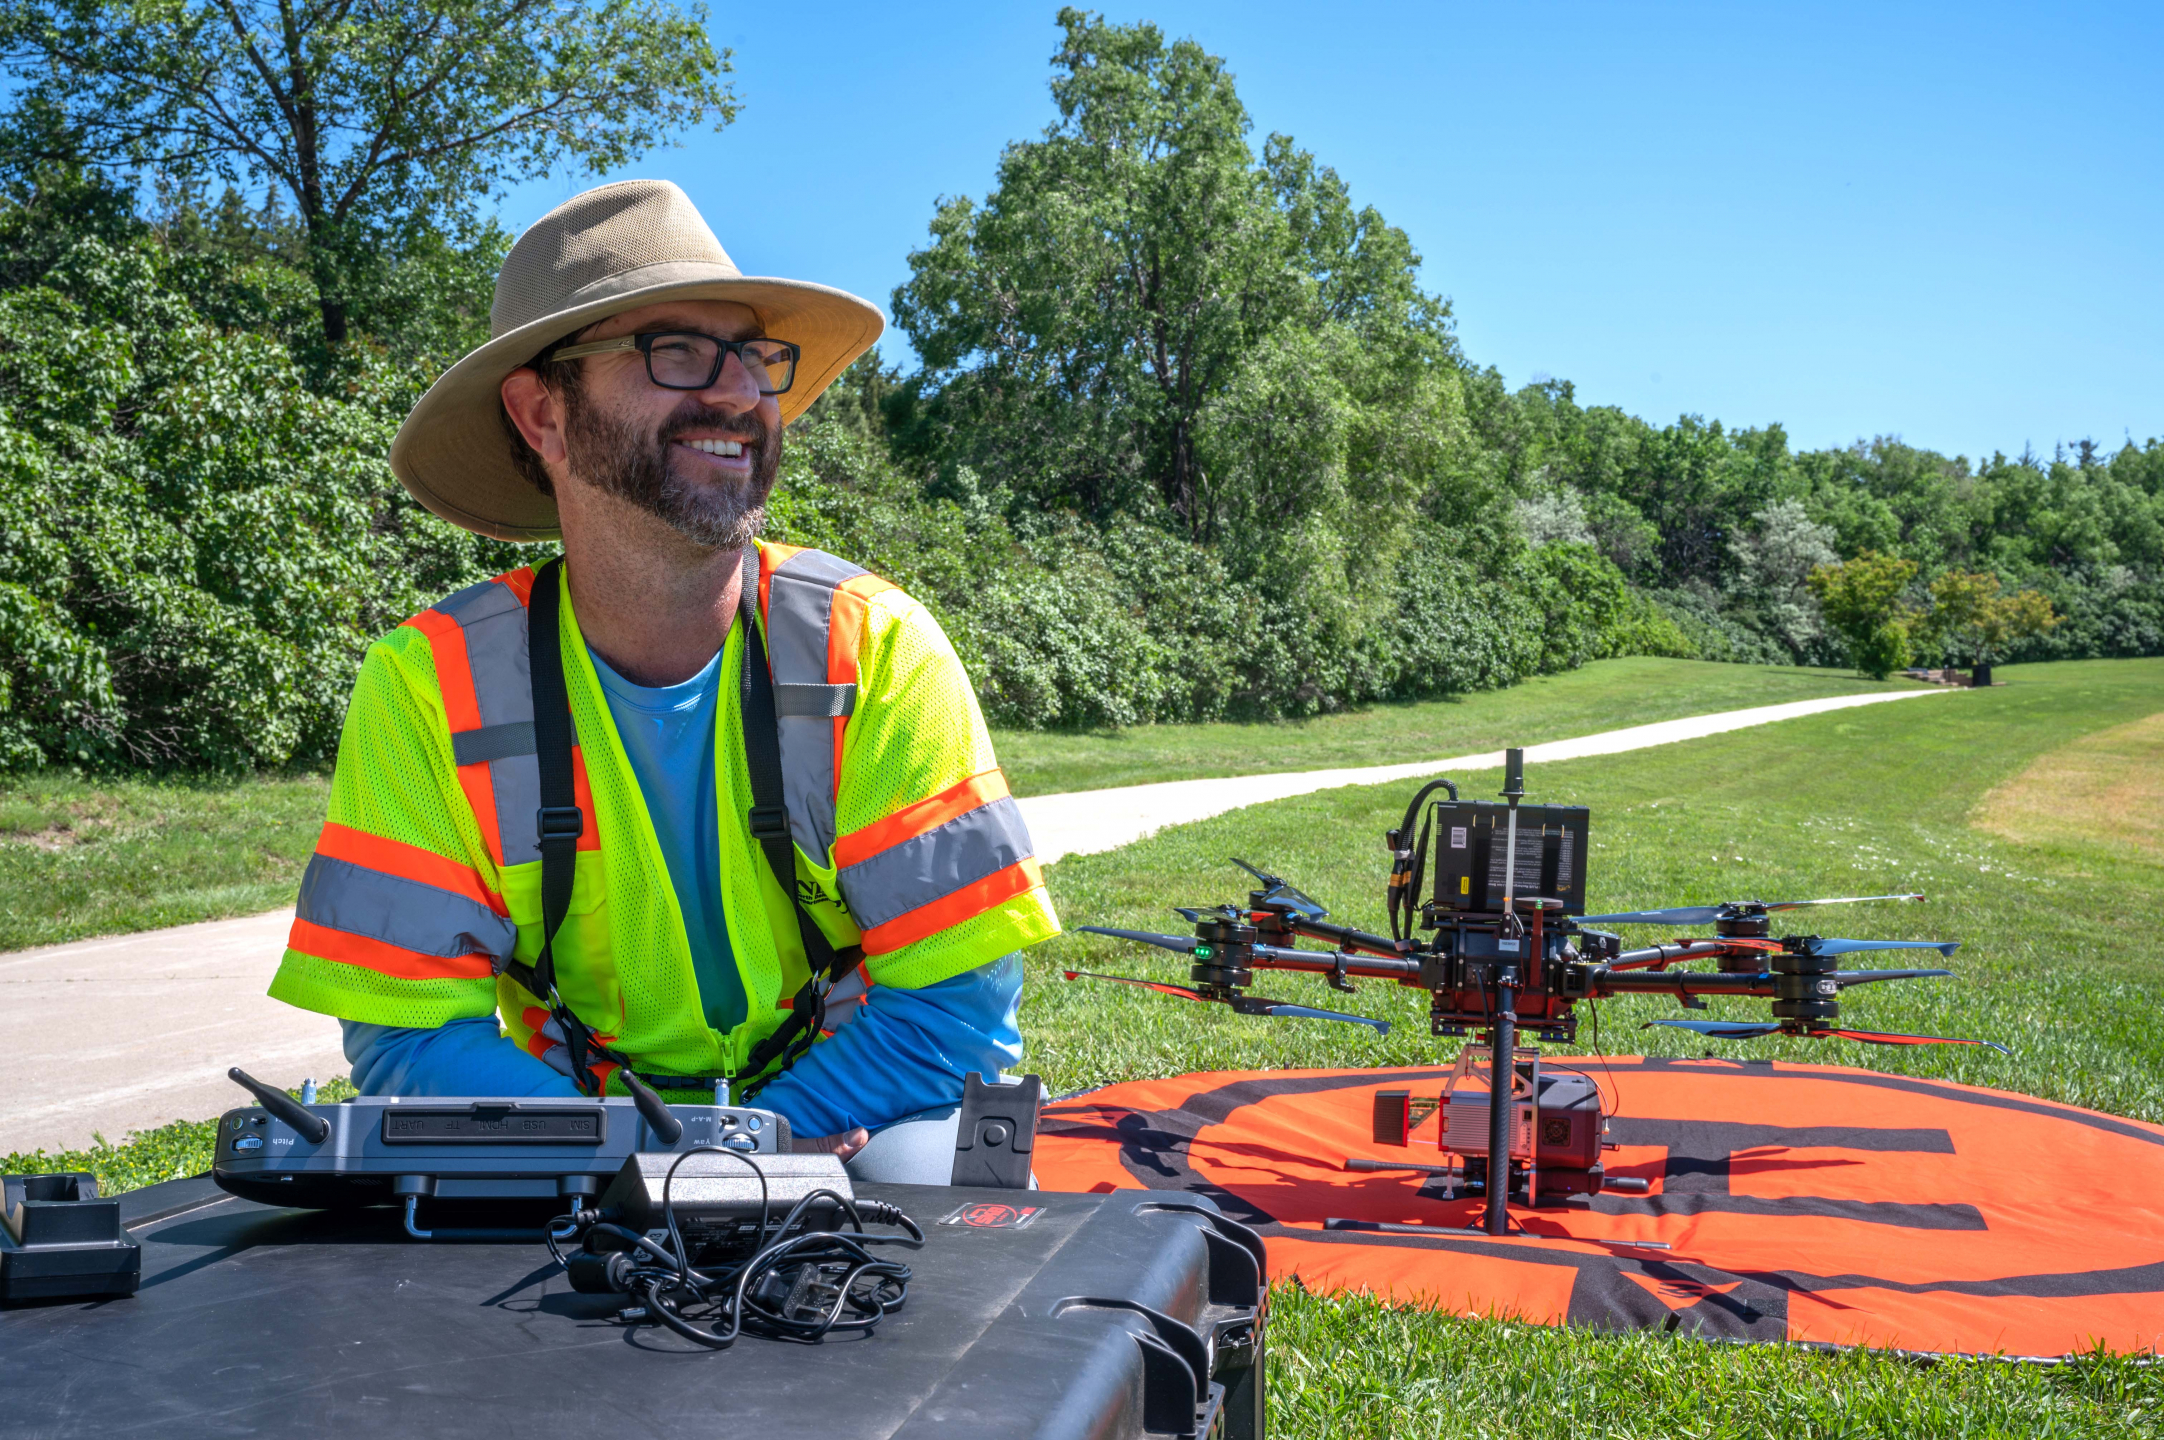 An NDDOT employee sits proudly next to the drone, ready to survey the area.